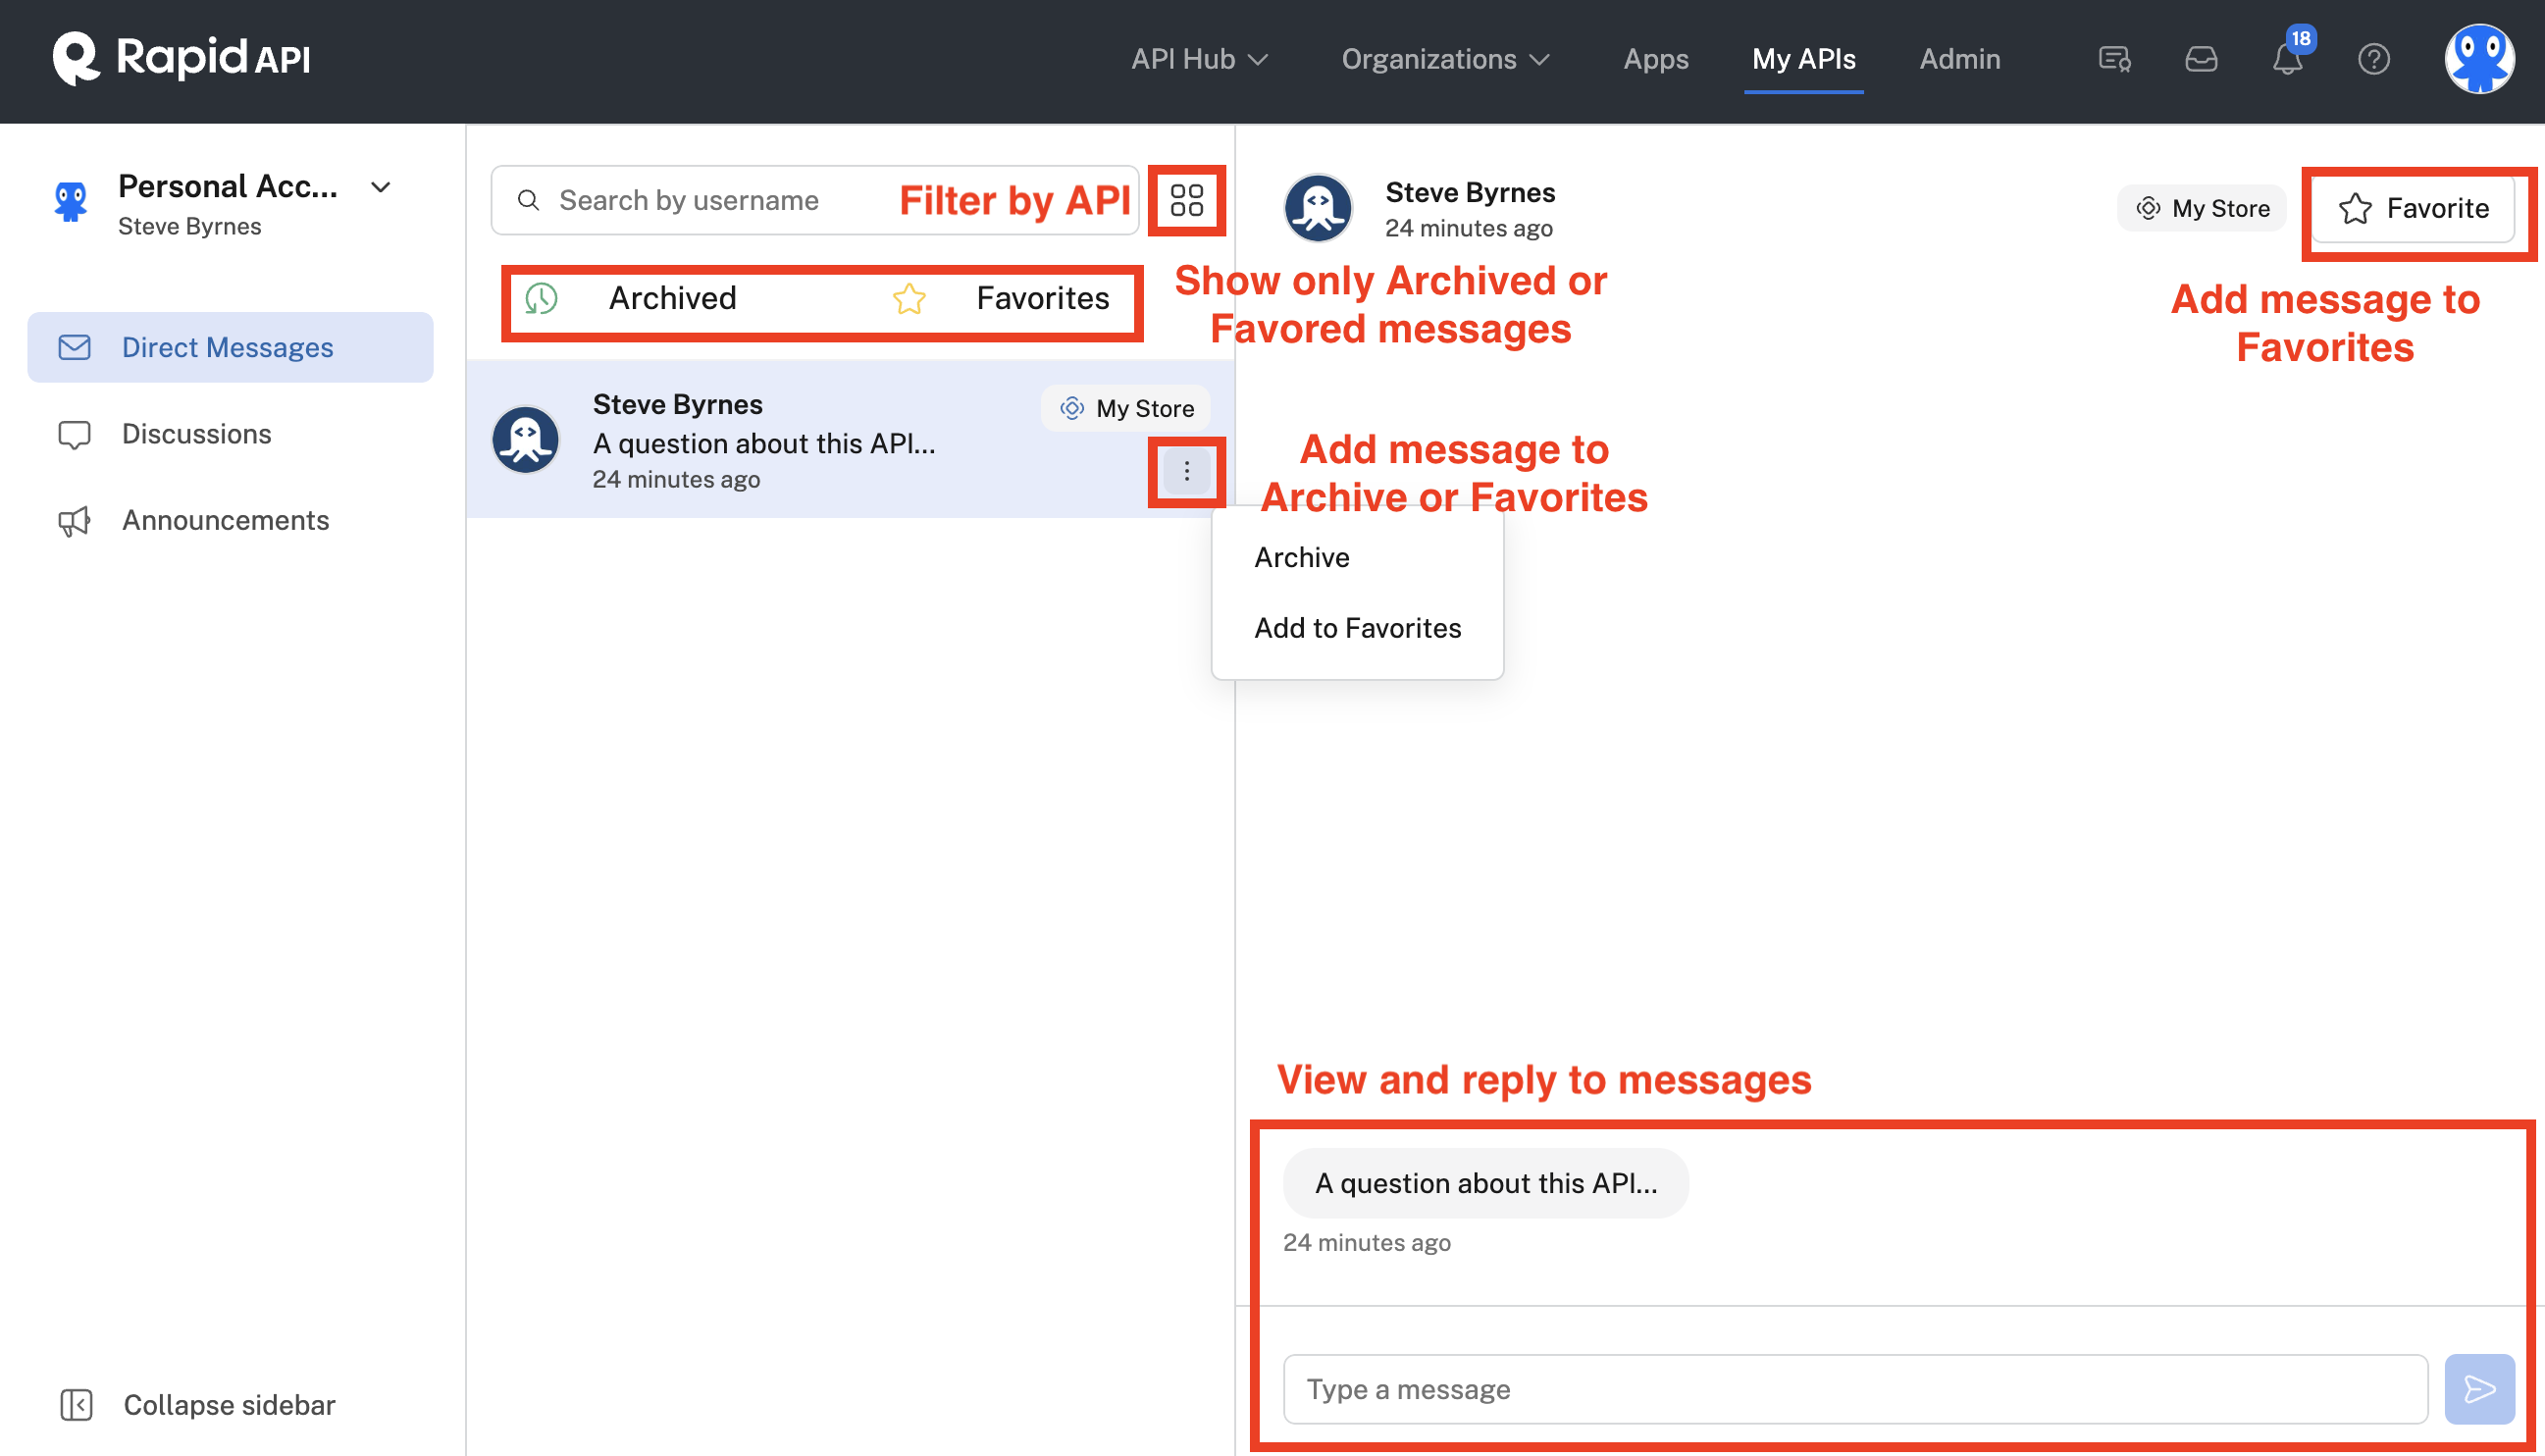 Viewing and replying to messages from API consumers.